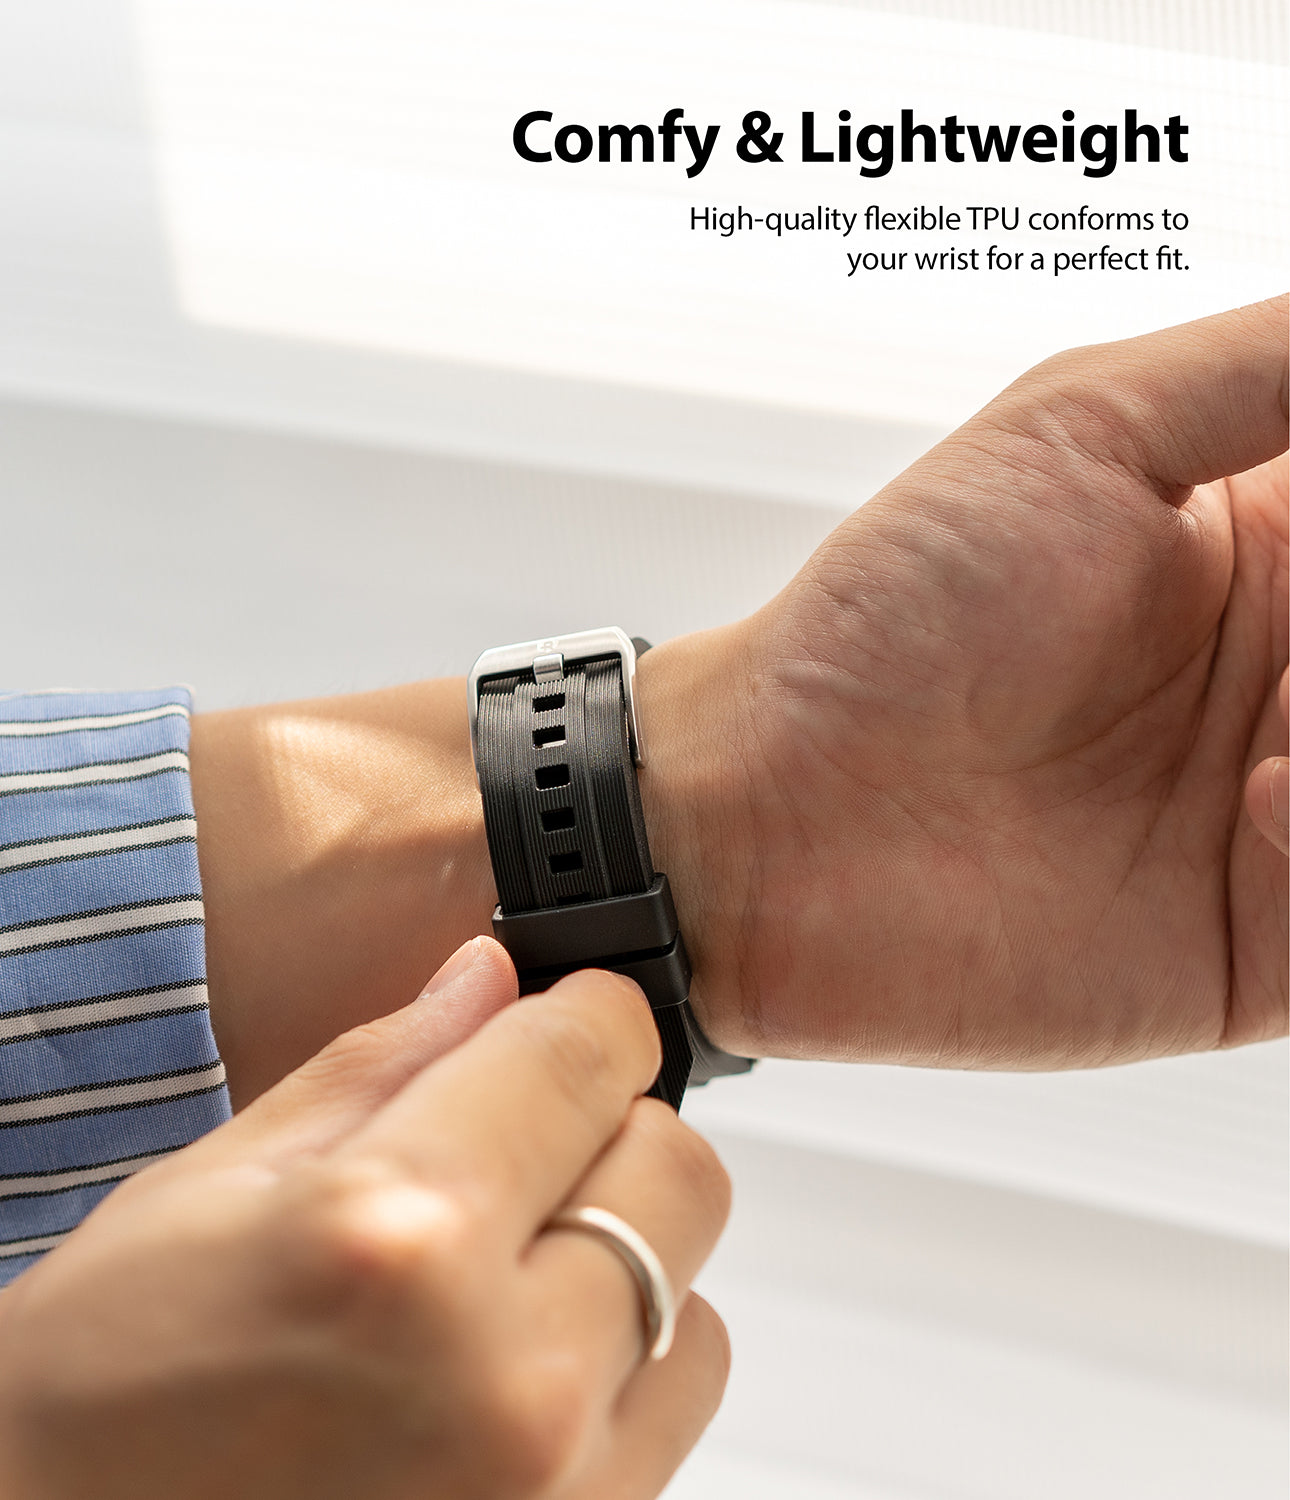 high quality flexible tpu conforms to your wrist for a perfect fit